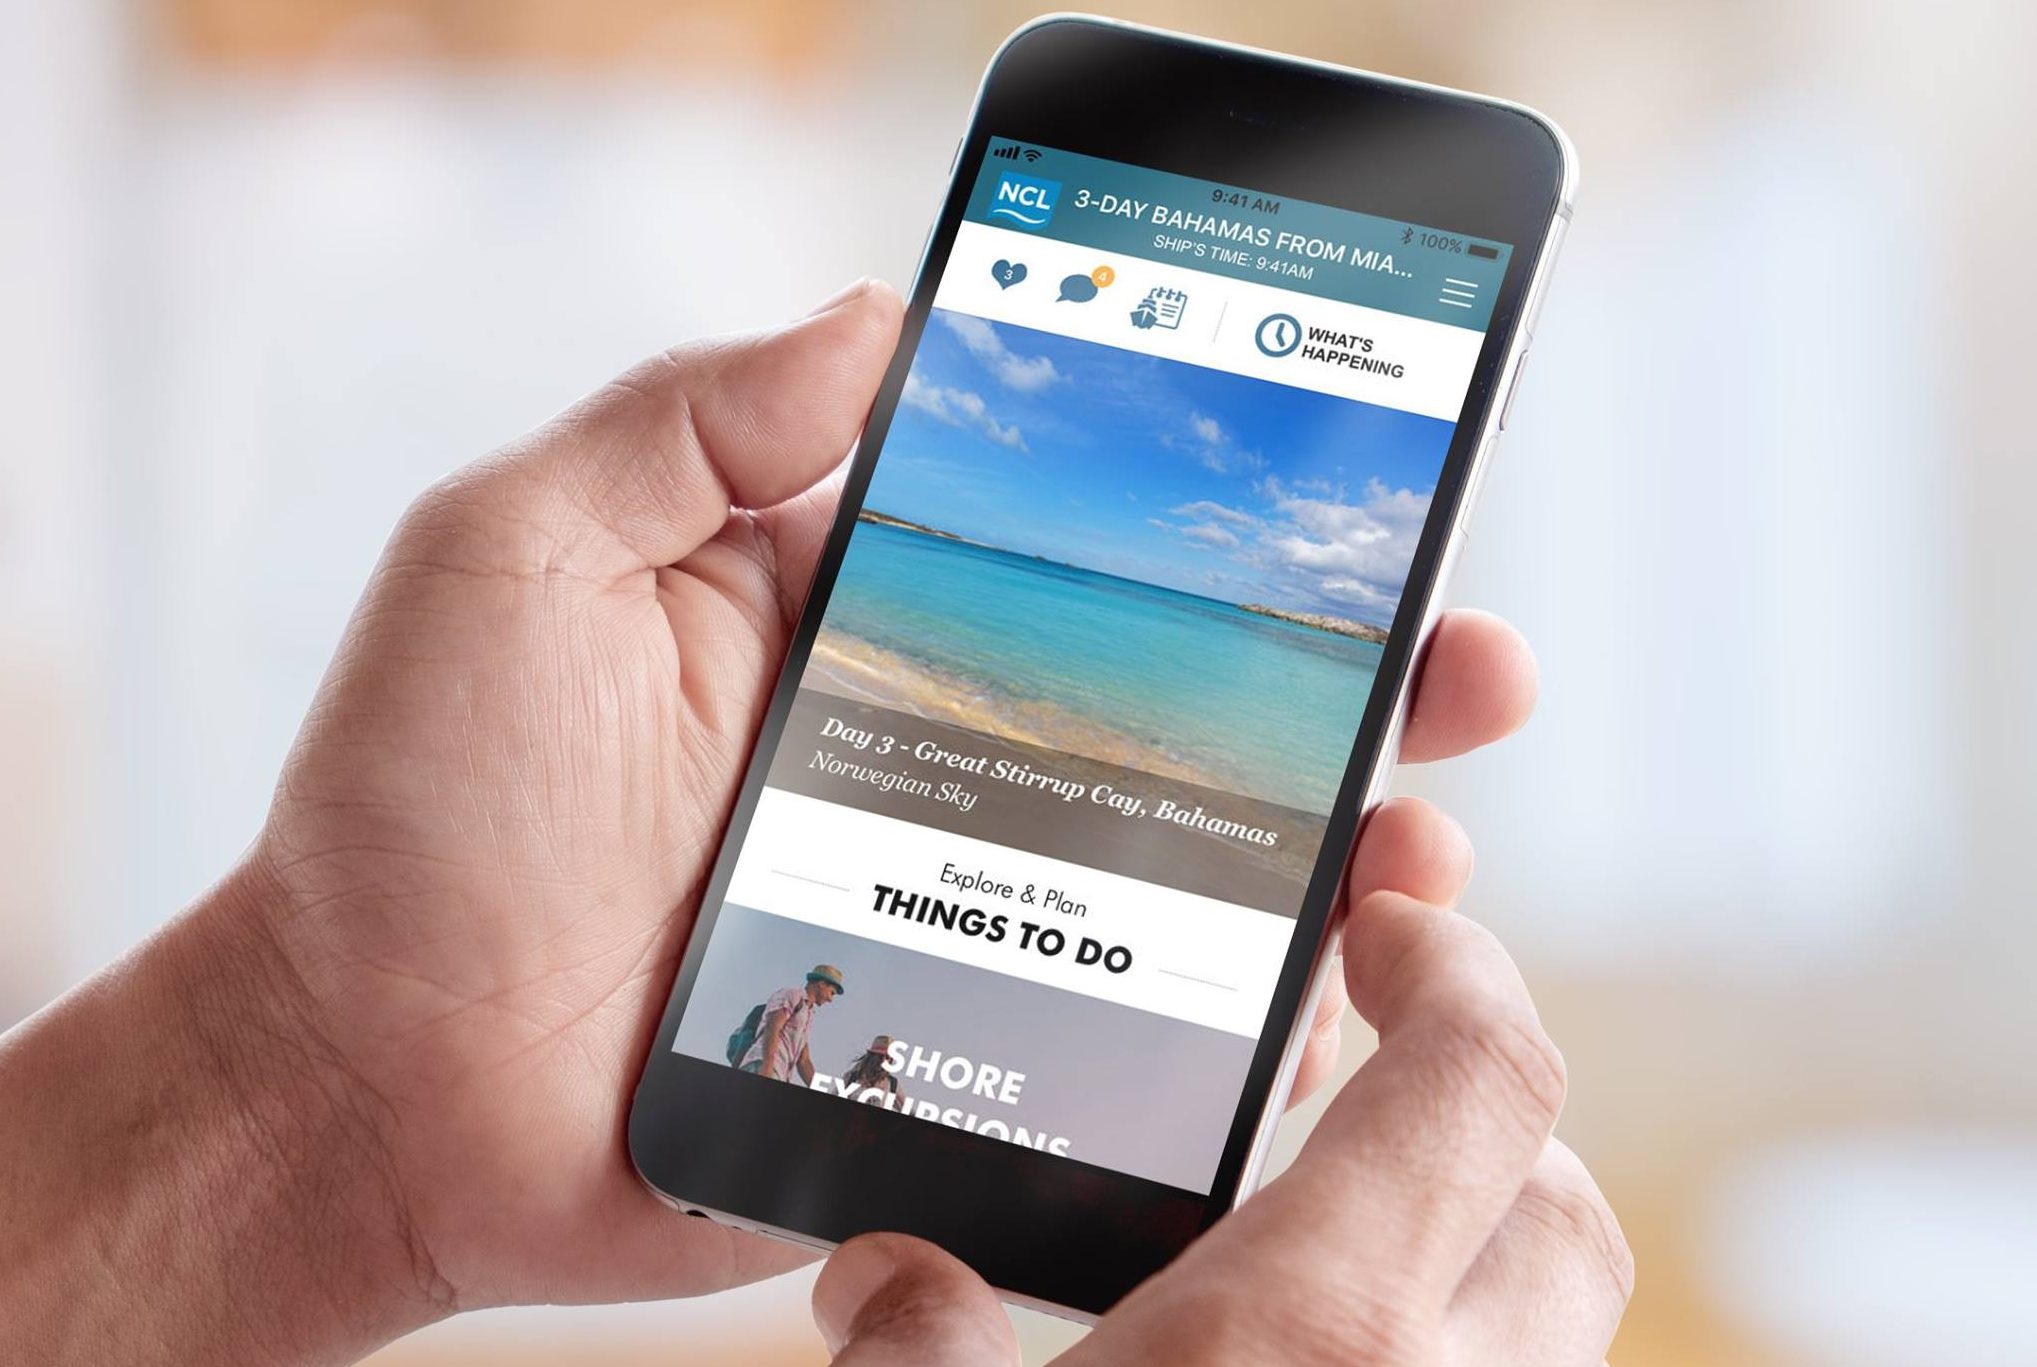 25 Tips to Save BIG on Your Next Cruise - Cruise App